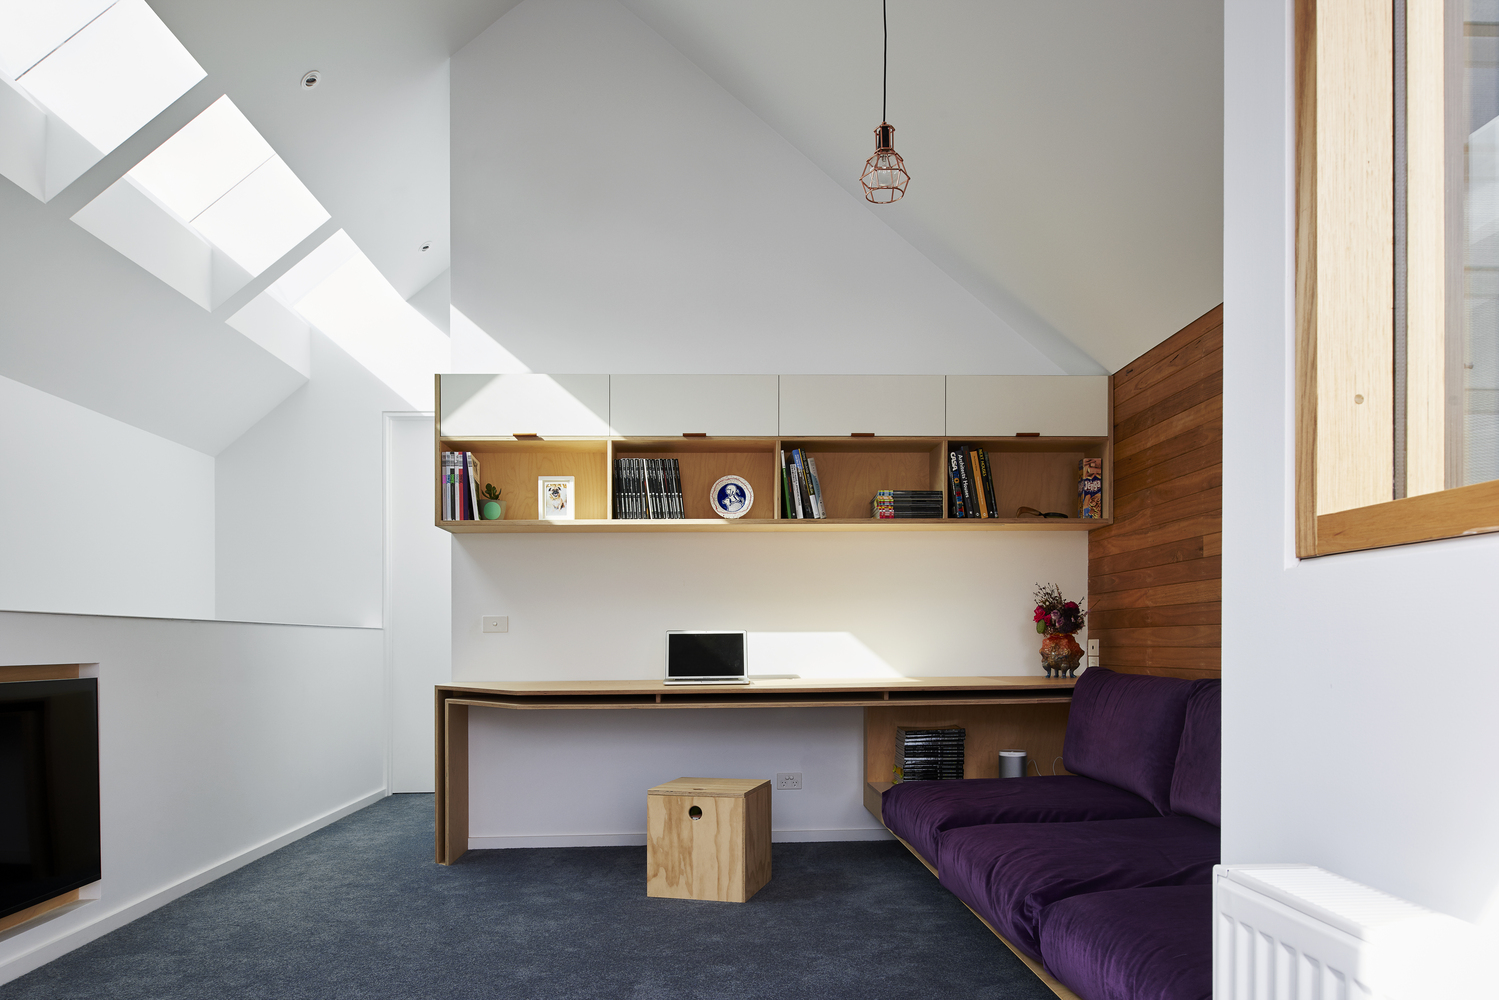 High House Sets the Level of Light, Functionality and Space to High